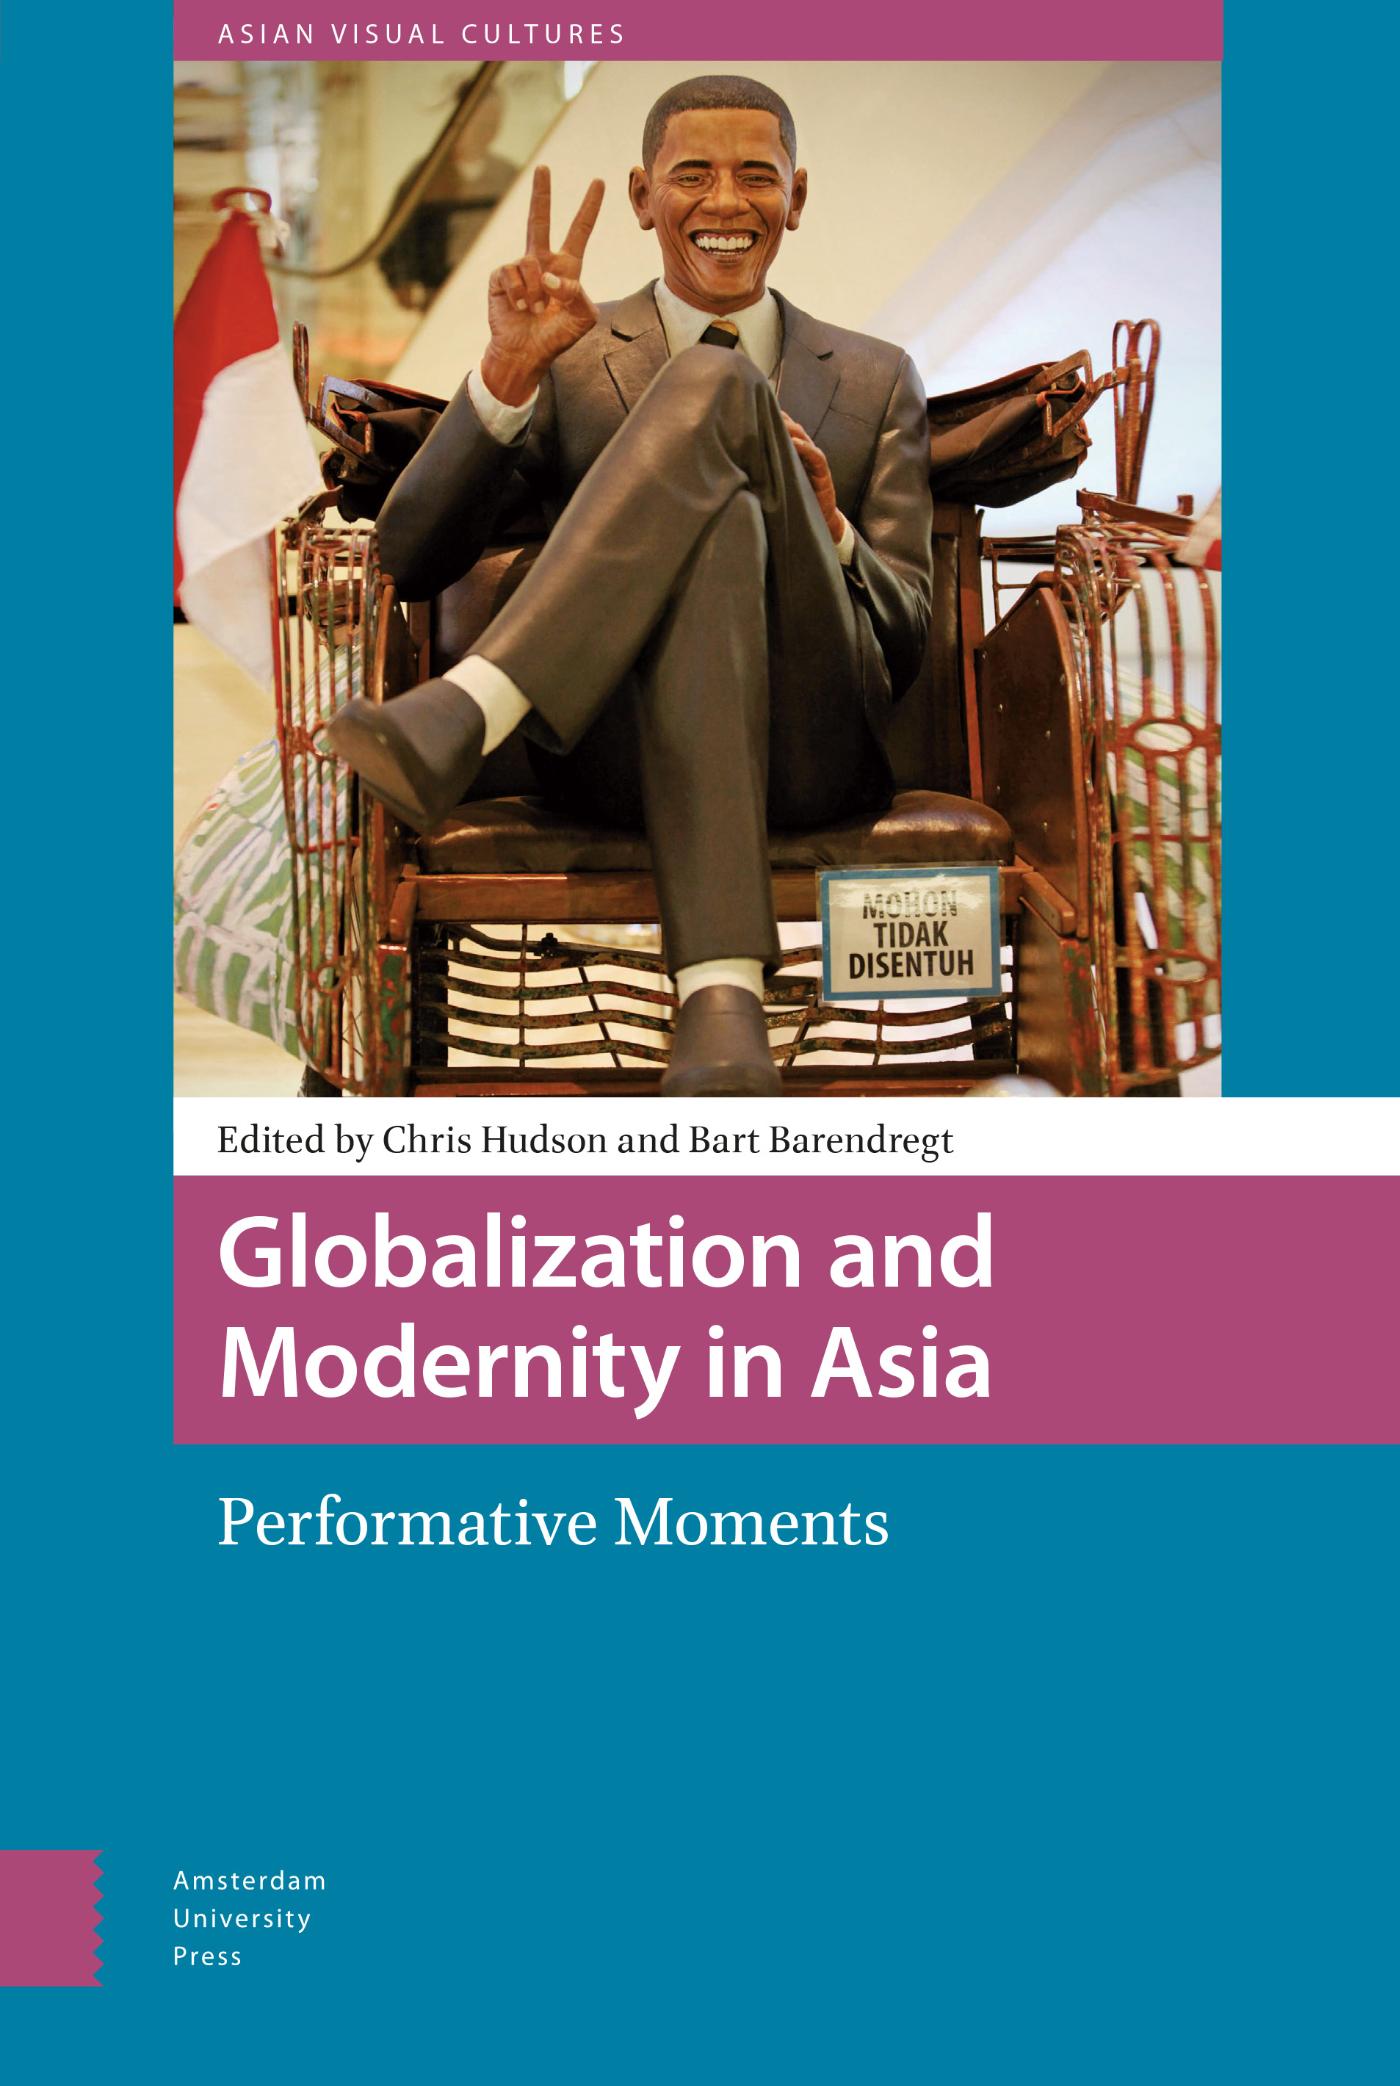 Globalization and Modernity in Asia